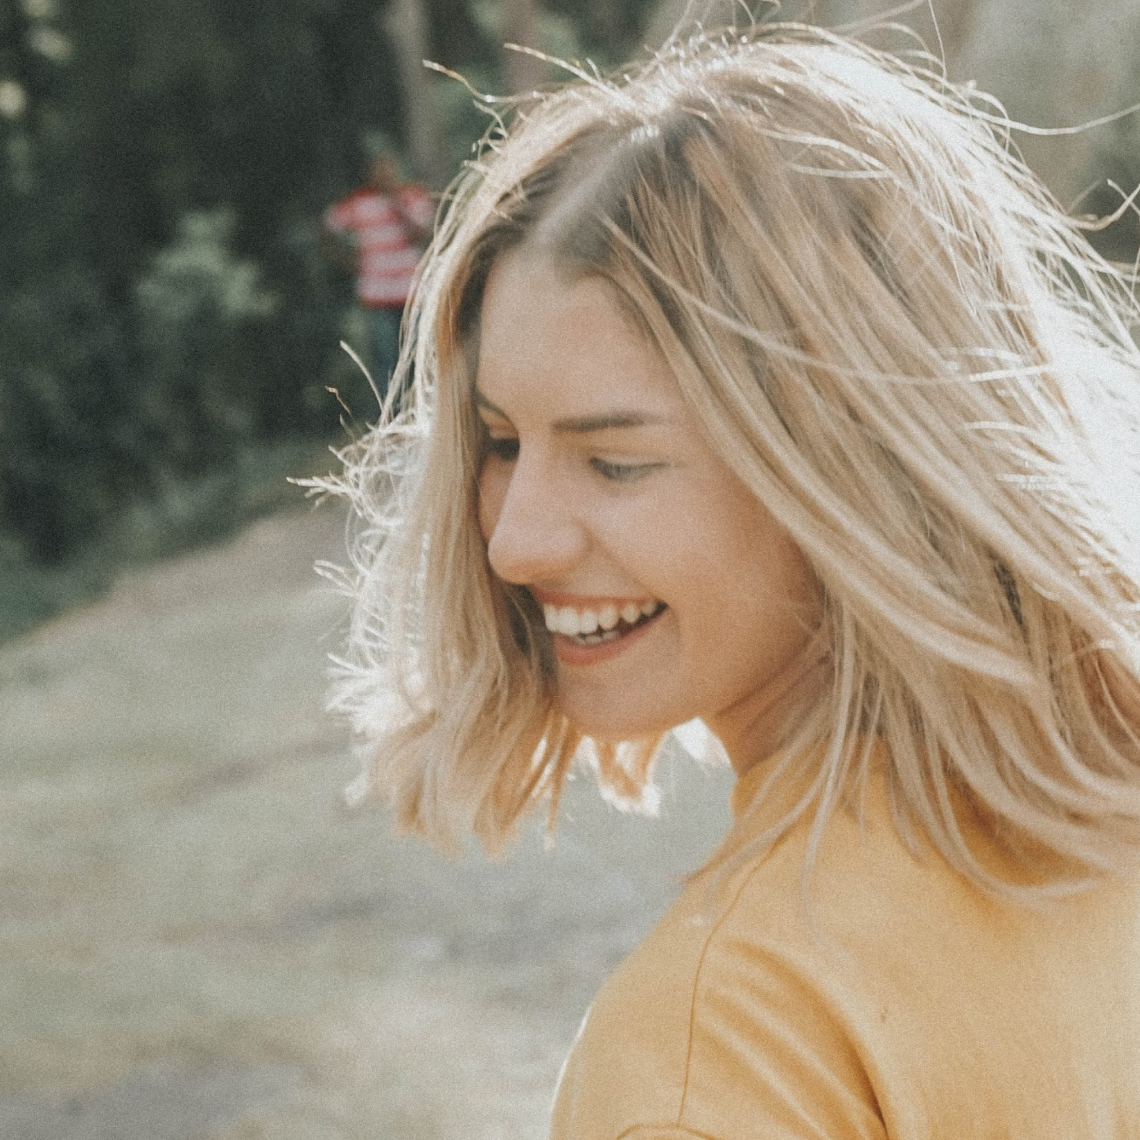 Photo of a Woman Smiling, by Gian Cescon, Unsplash